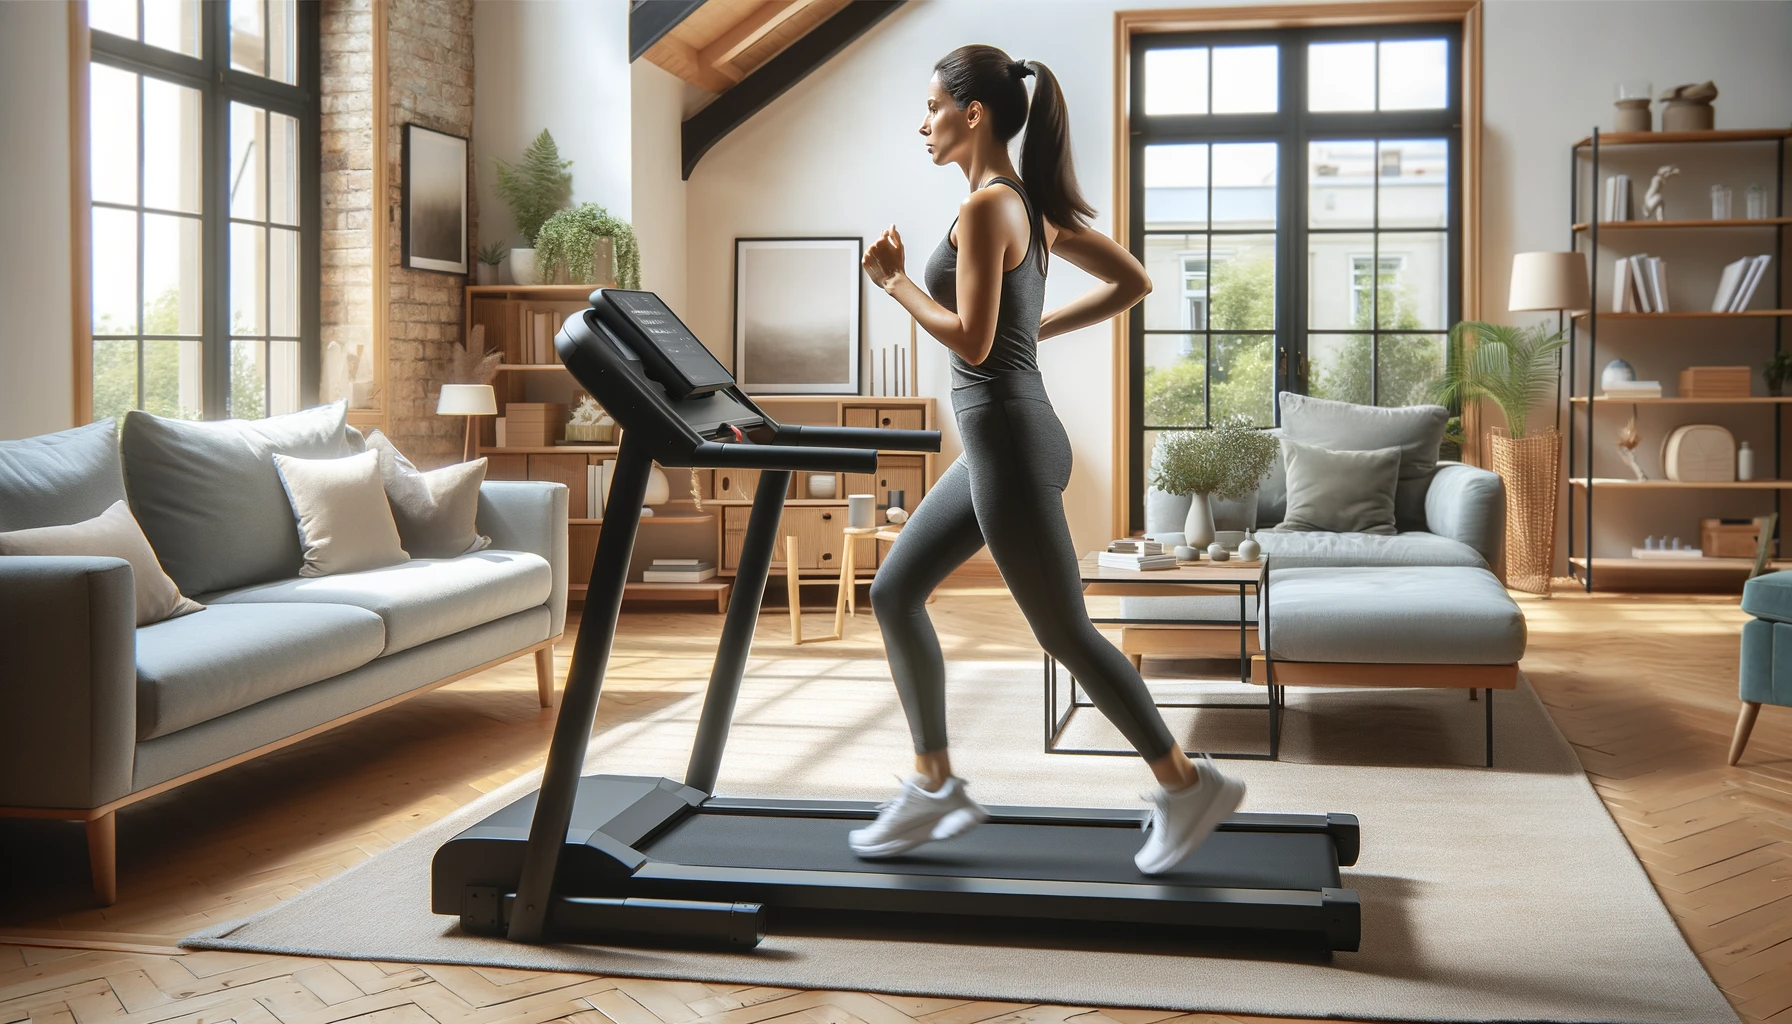 What are the Benefits of Using a Treadmill for Fitness at Home?